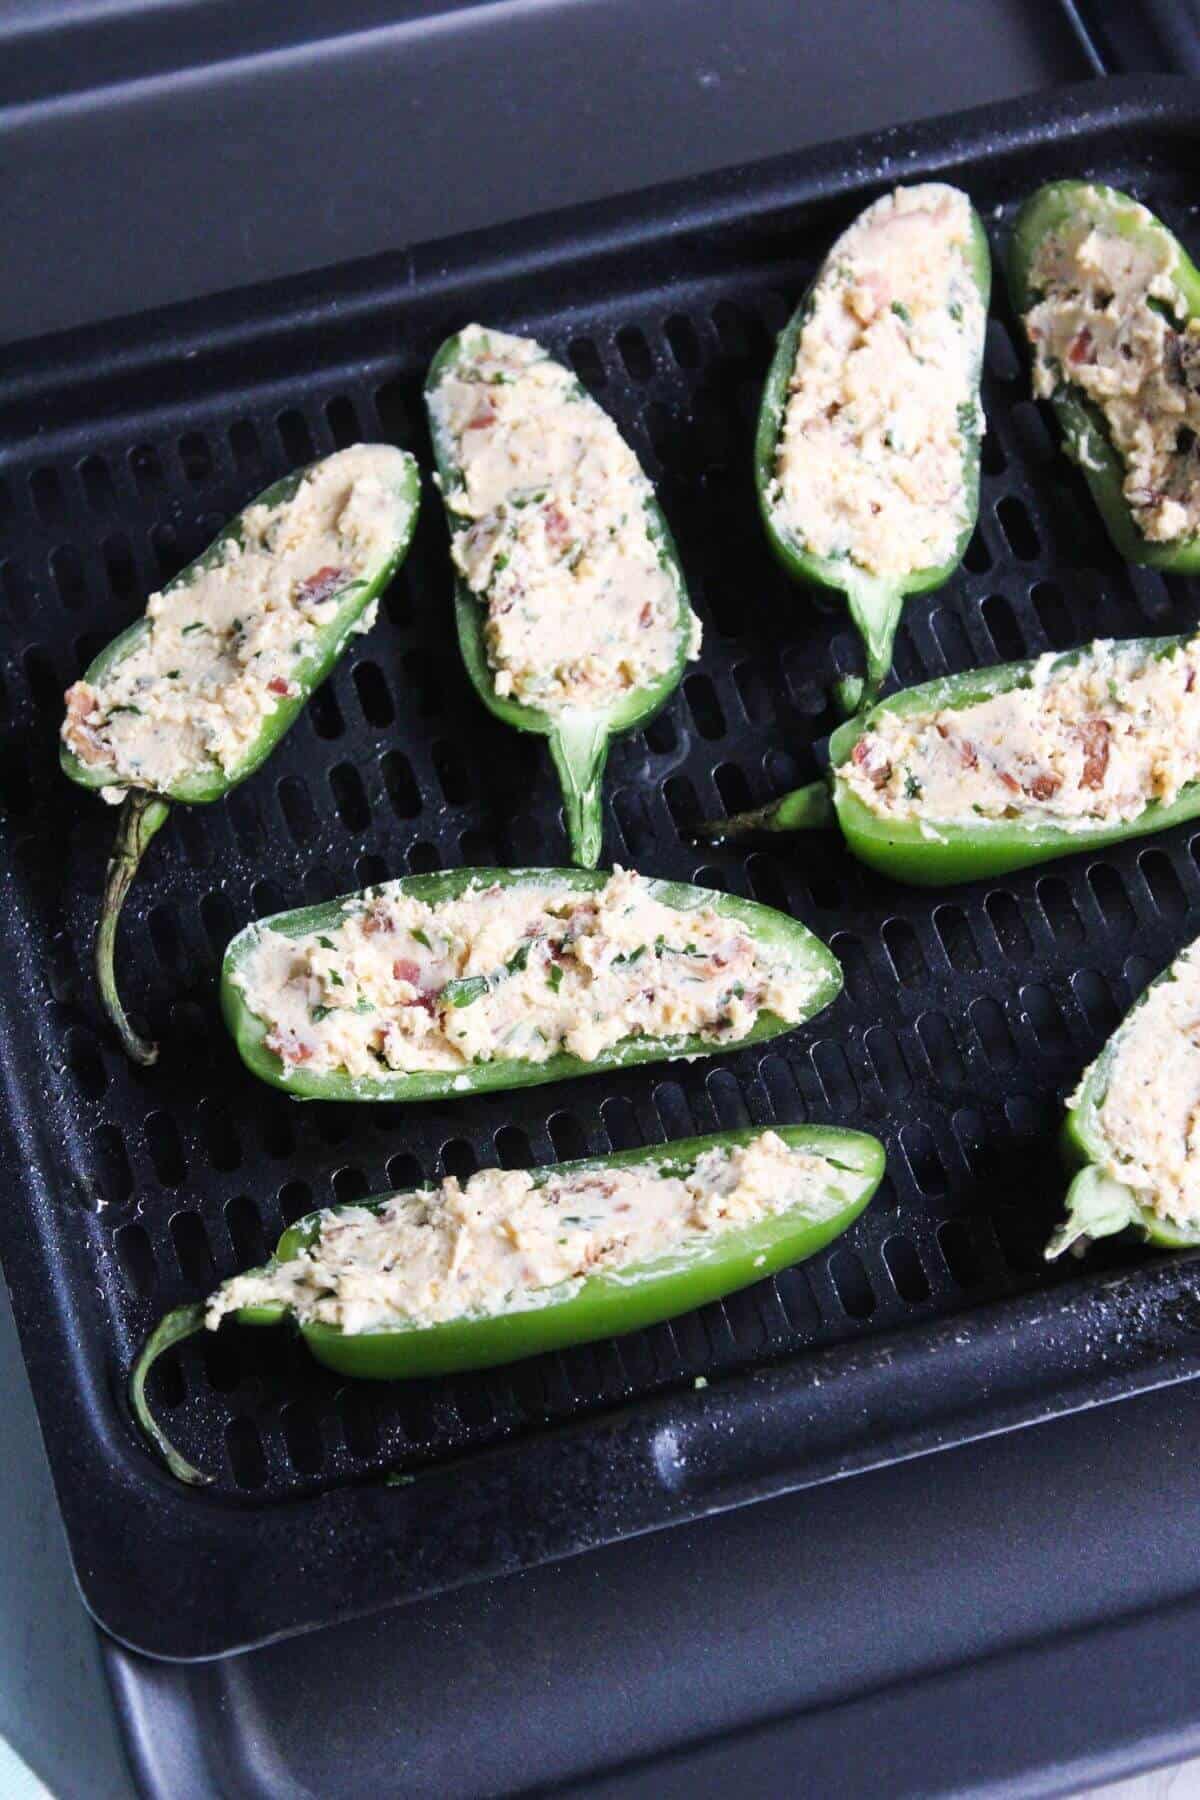 Peppers stuffed with filling on air fryer tray.